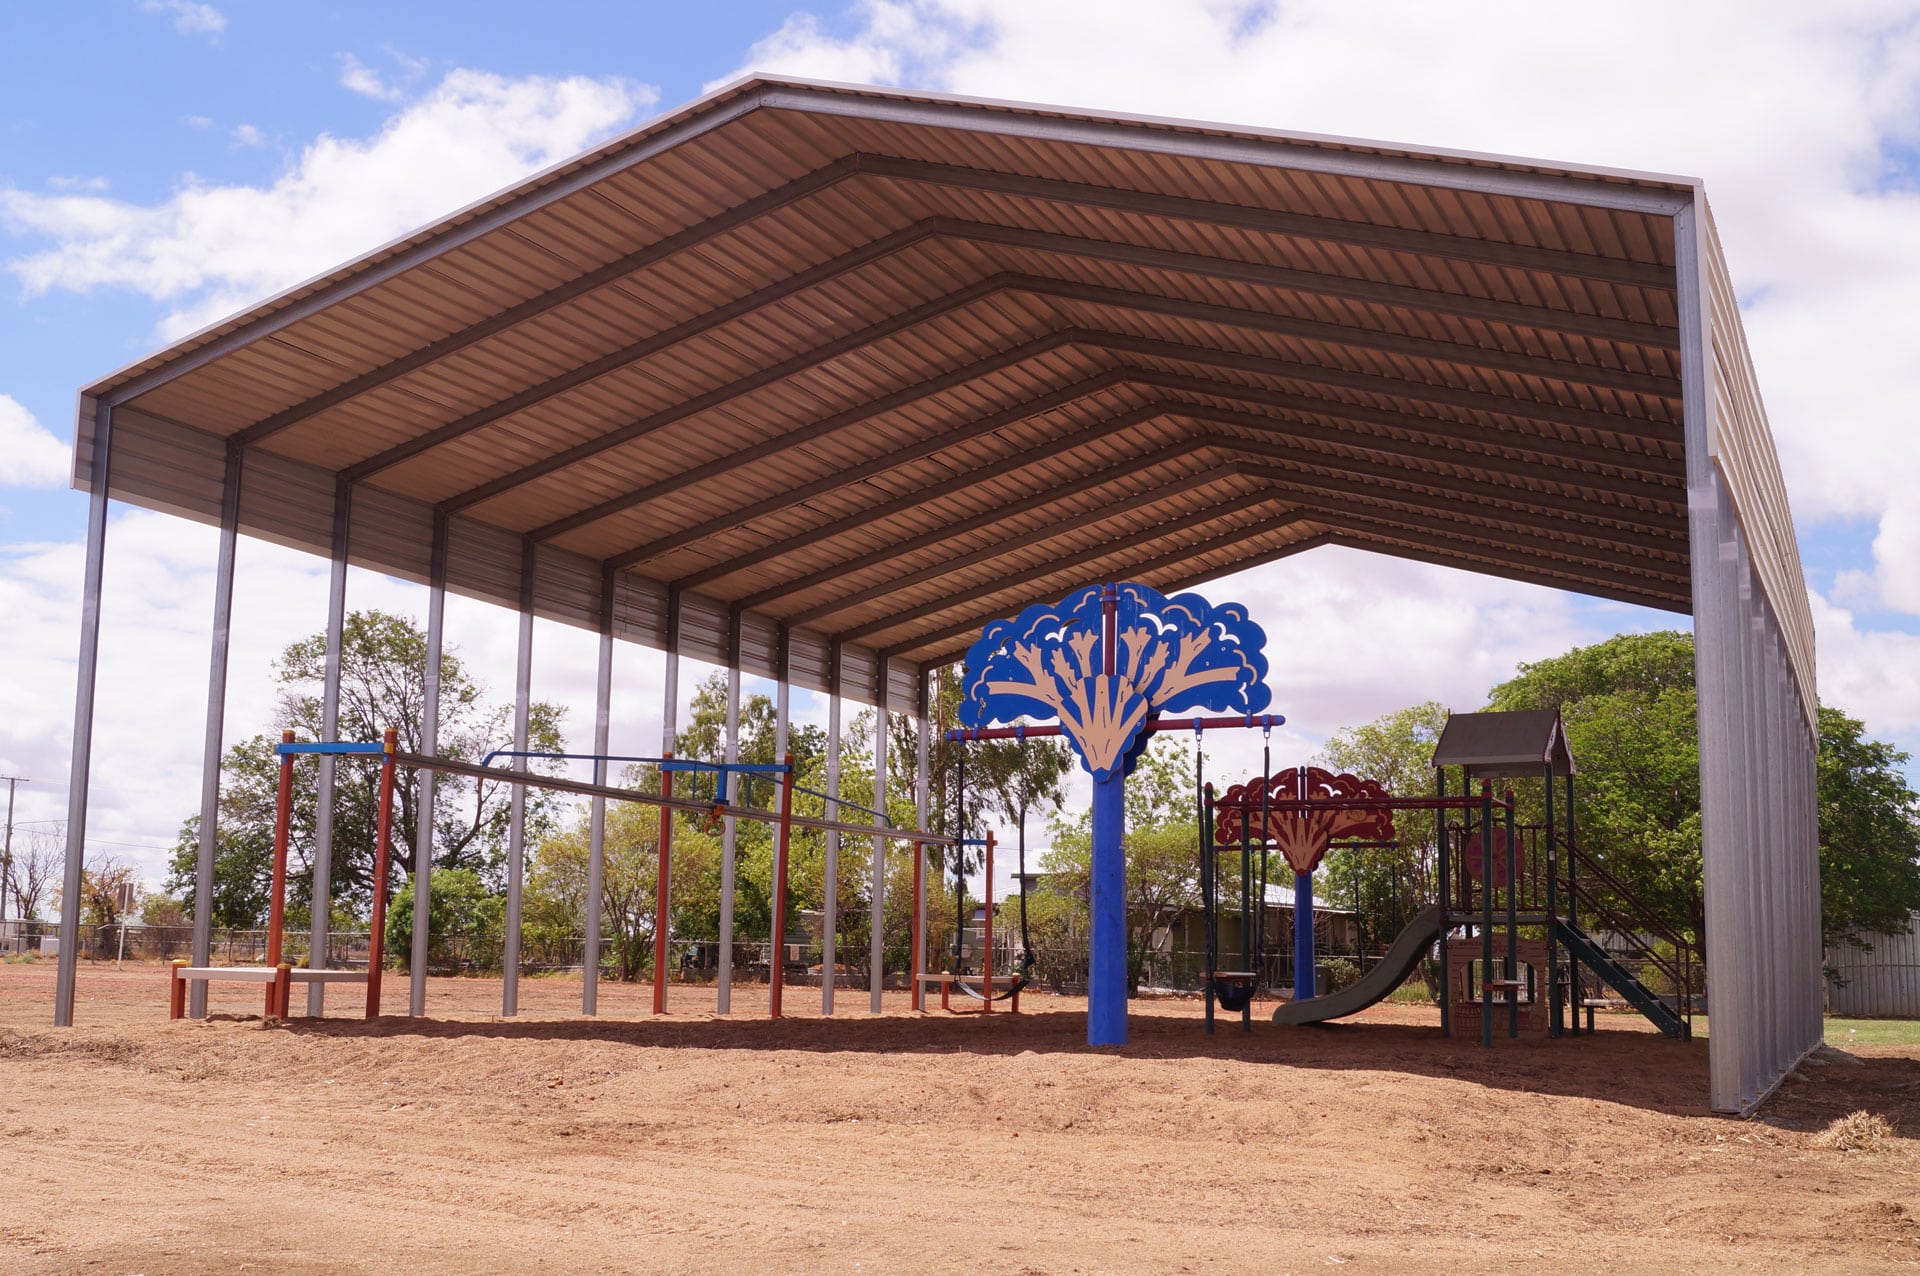 qld shade sheds & dome shelters qld shadeshelters